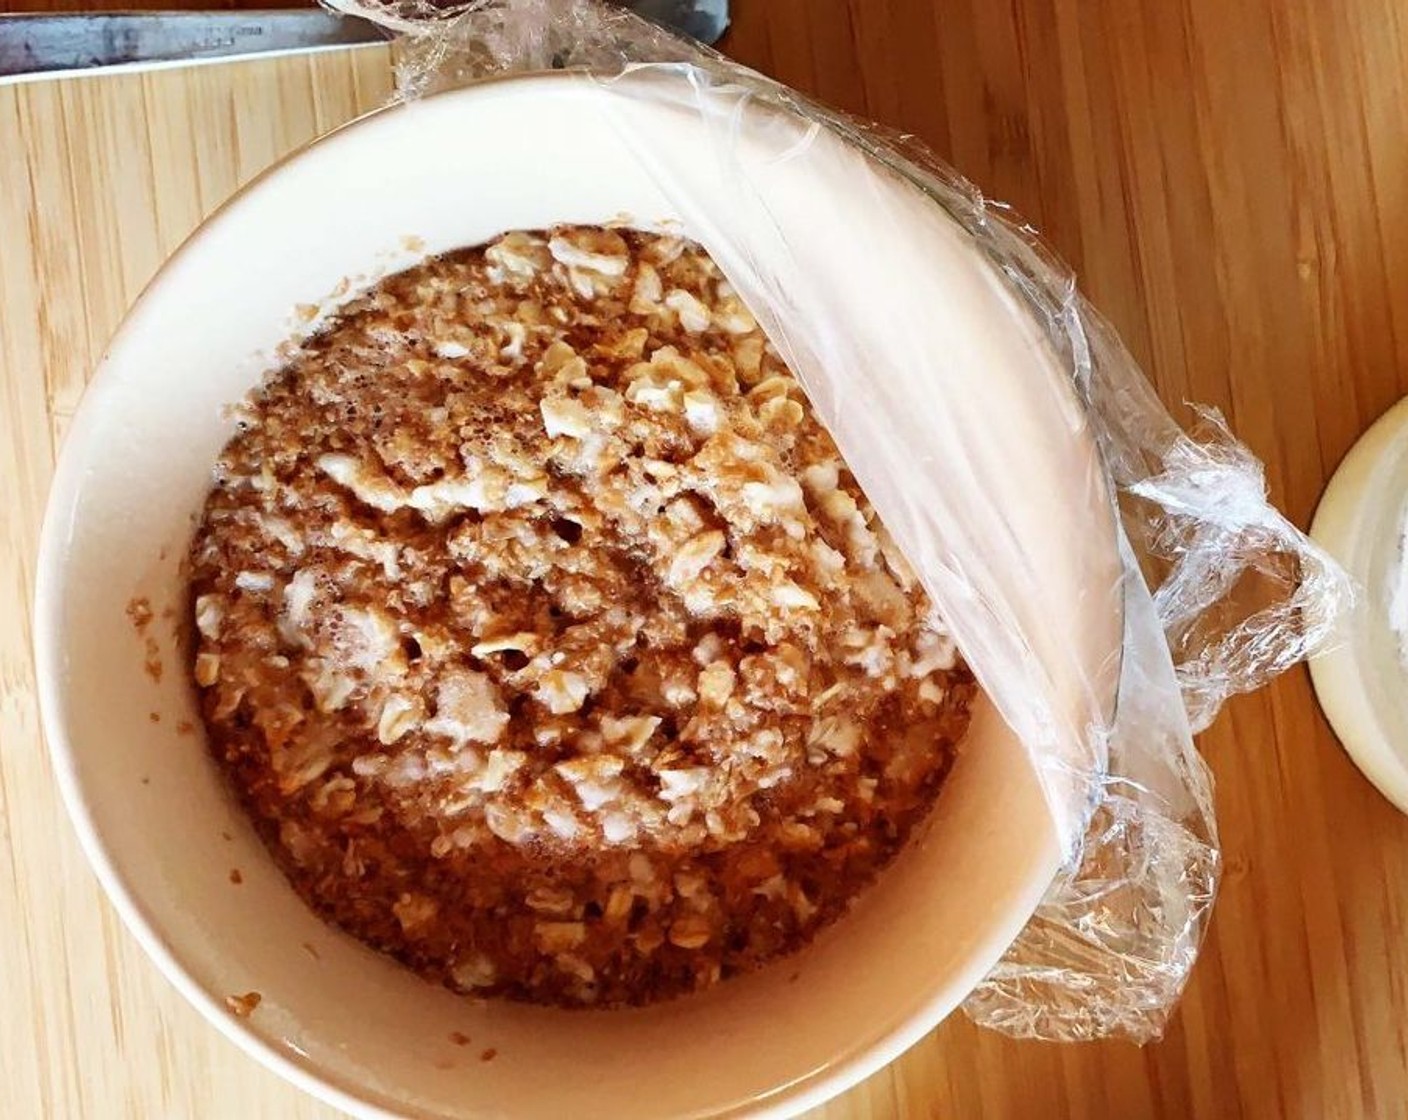 step 1 In a microwave safe bowl, combine Old Fashioned Rolled Oats (3 1/2 Tbsp), Spelt Flakes (3 1/2 Tbsp), Wheat Bran (3 Tbsp), Ground Flaxseed (1 Tbsp), and add Unsweetened Almond Milk (1/2 cup). Stir to combine then cover with plastic wrap and microwave on high for 1 1/2 minutes.